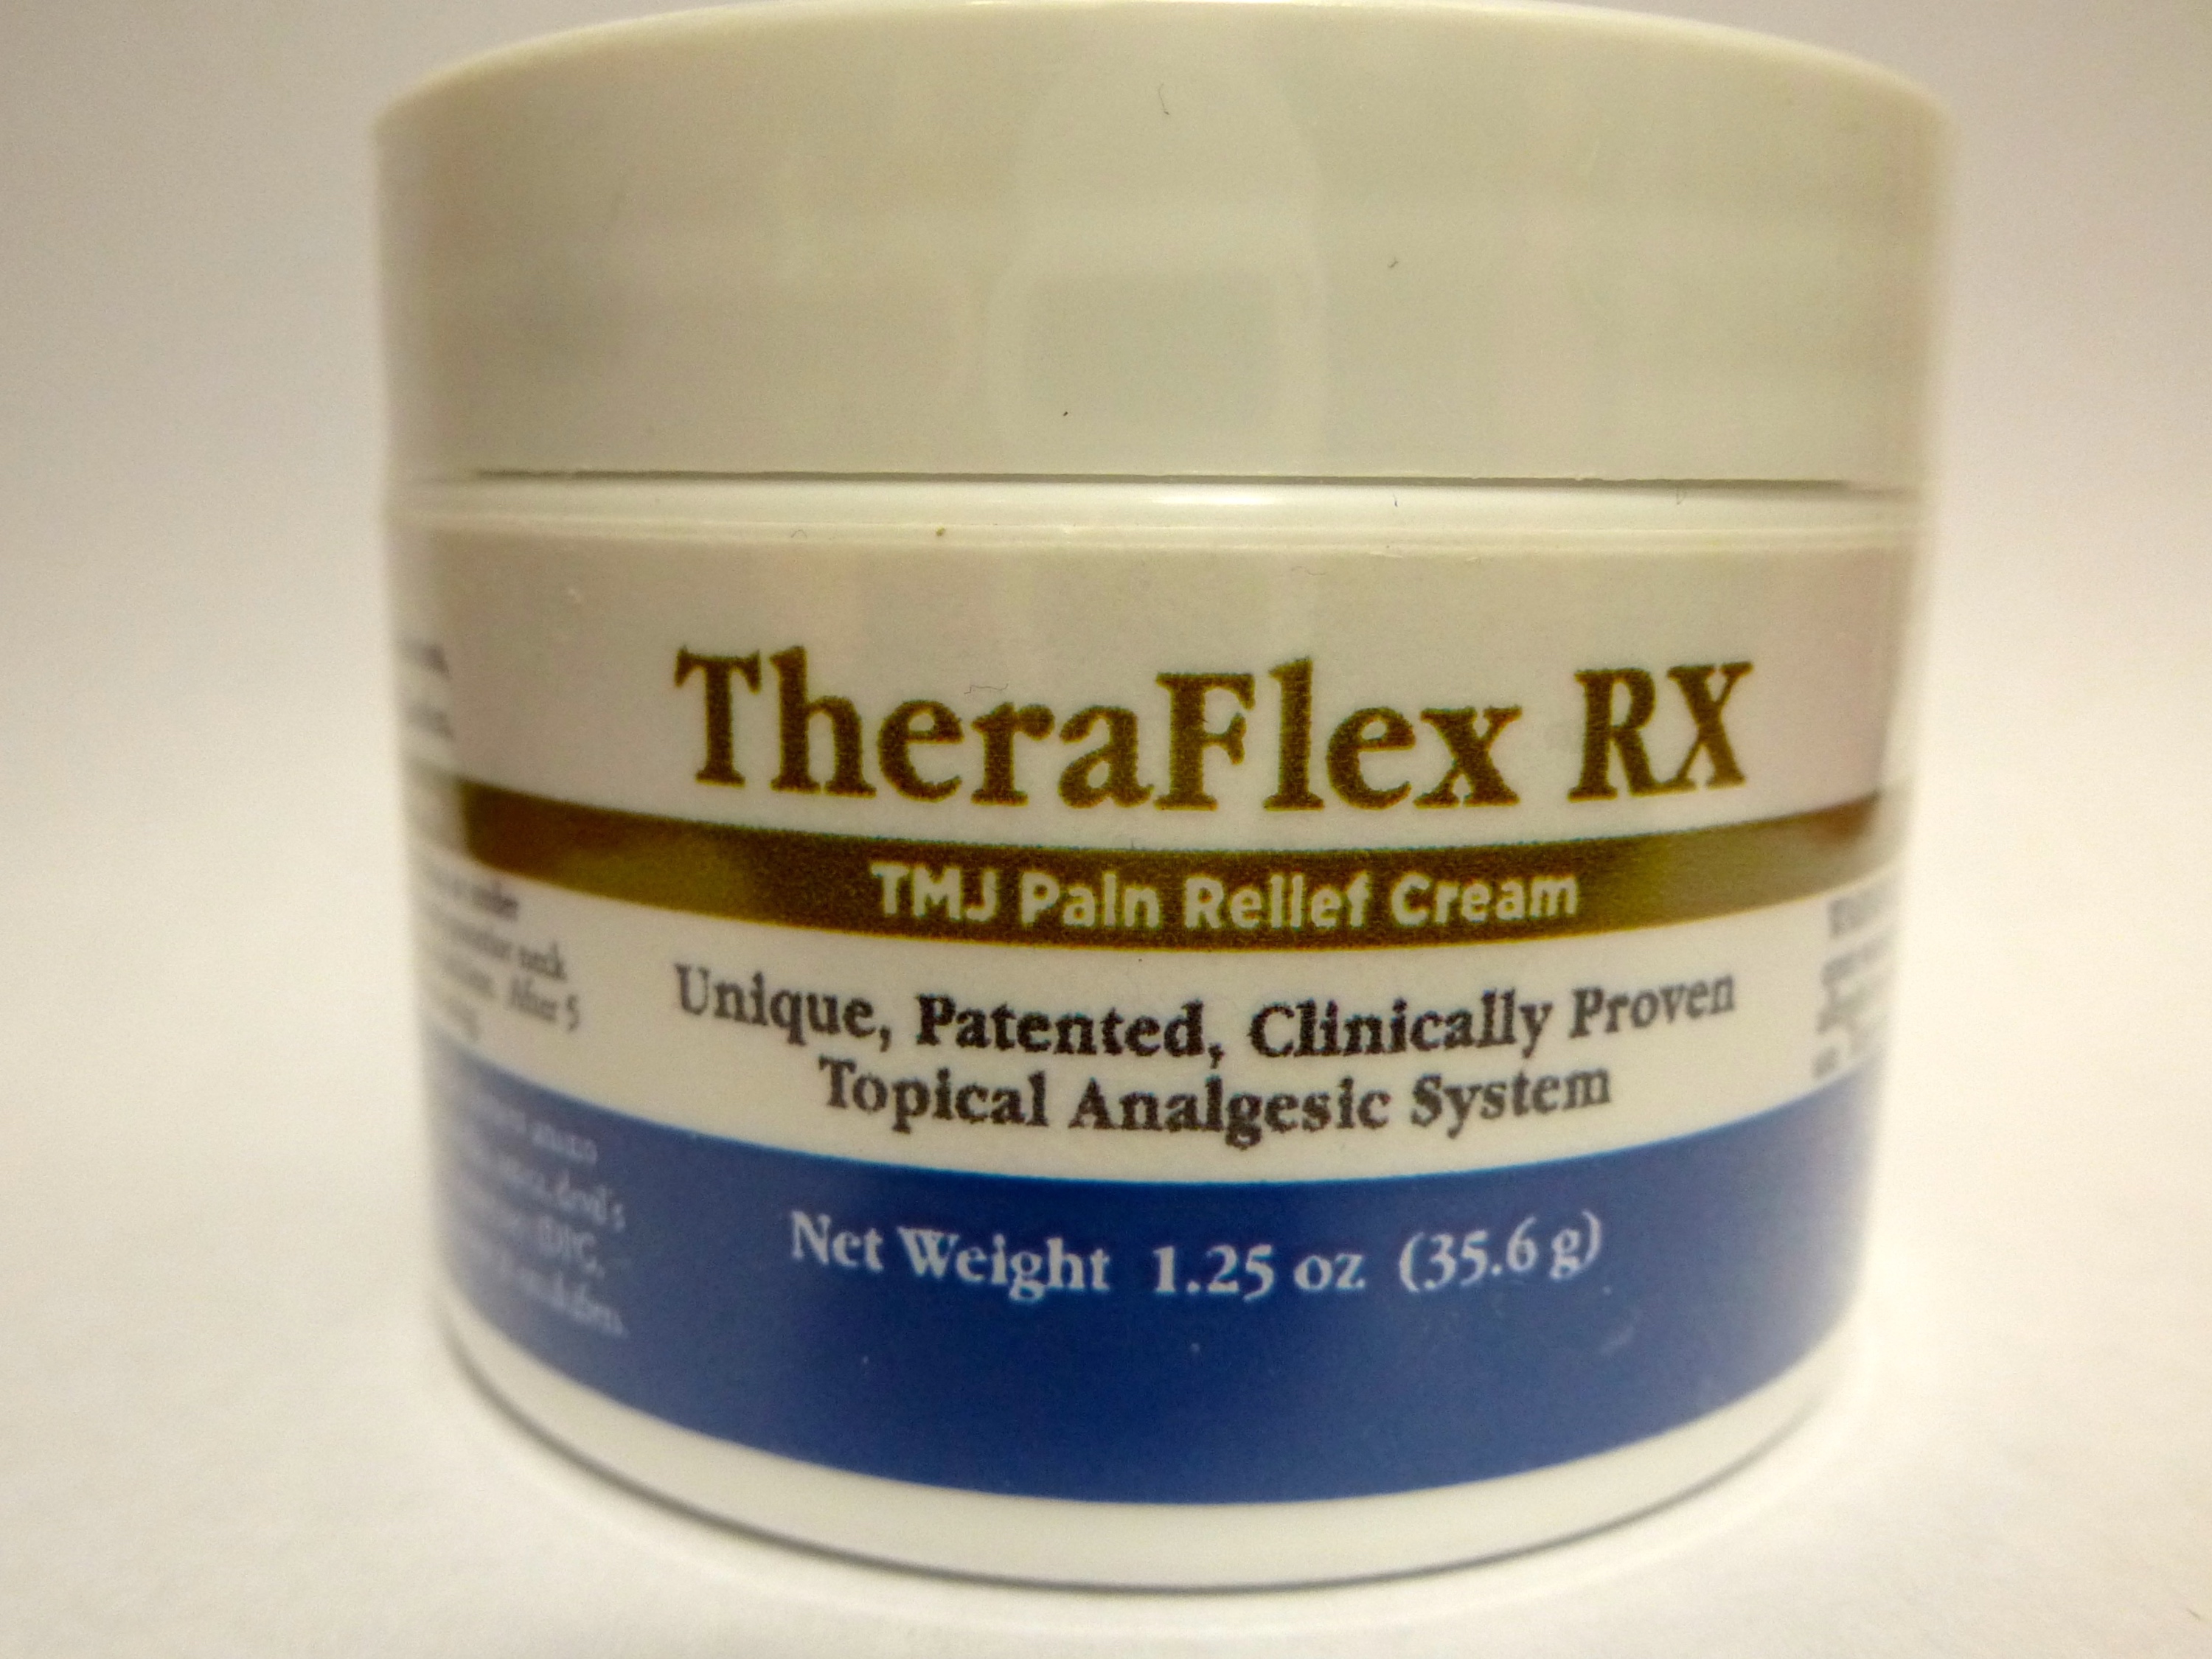 Theraflex RX TMJ provides maximal relief for TMJ Pain